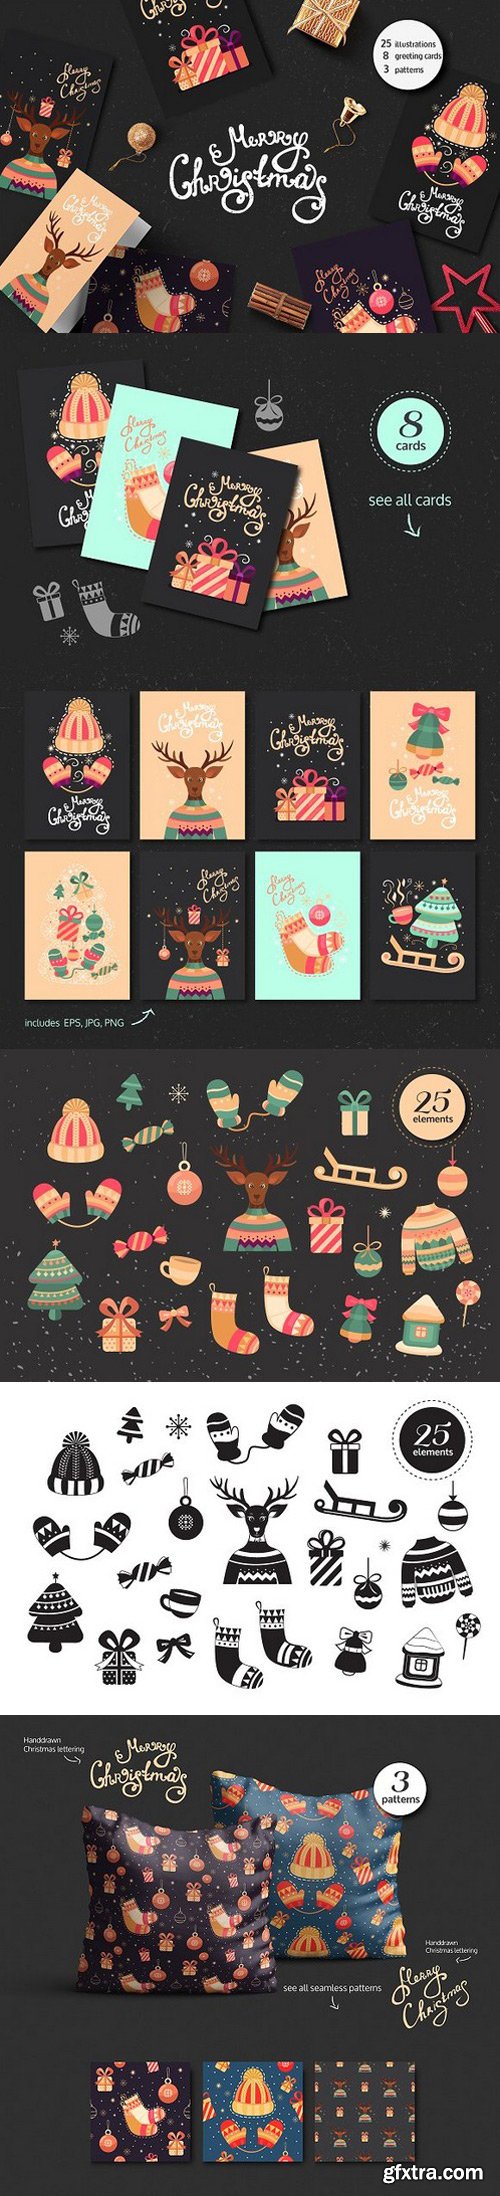 CM - Christmas cards and illustrations 1115591